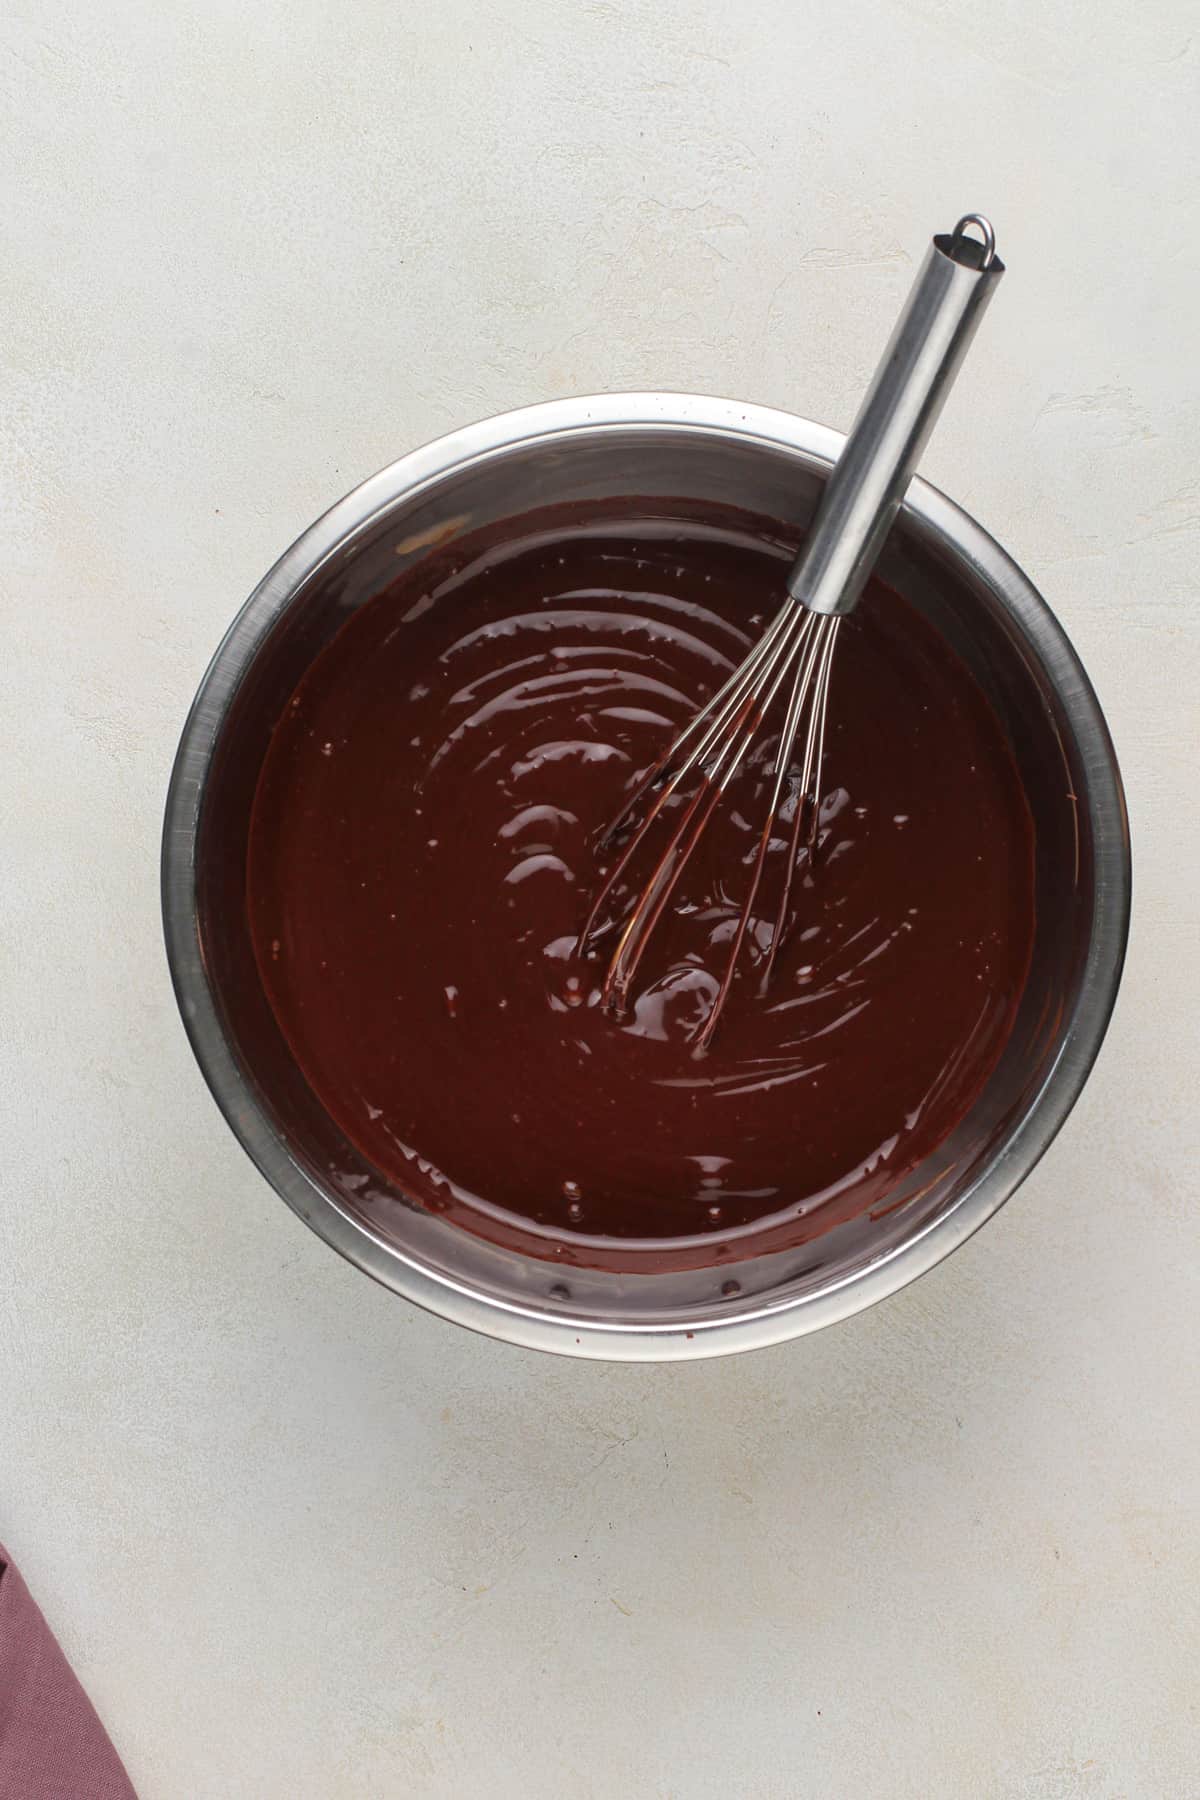 Chocolate ganache being whisked in a metal bowl.